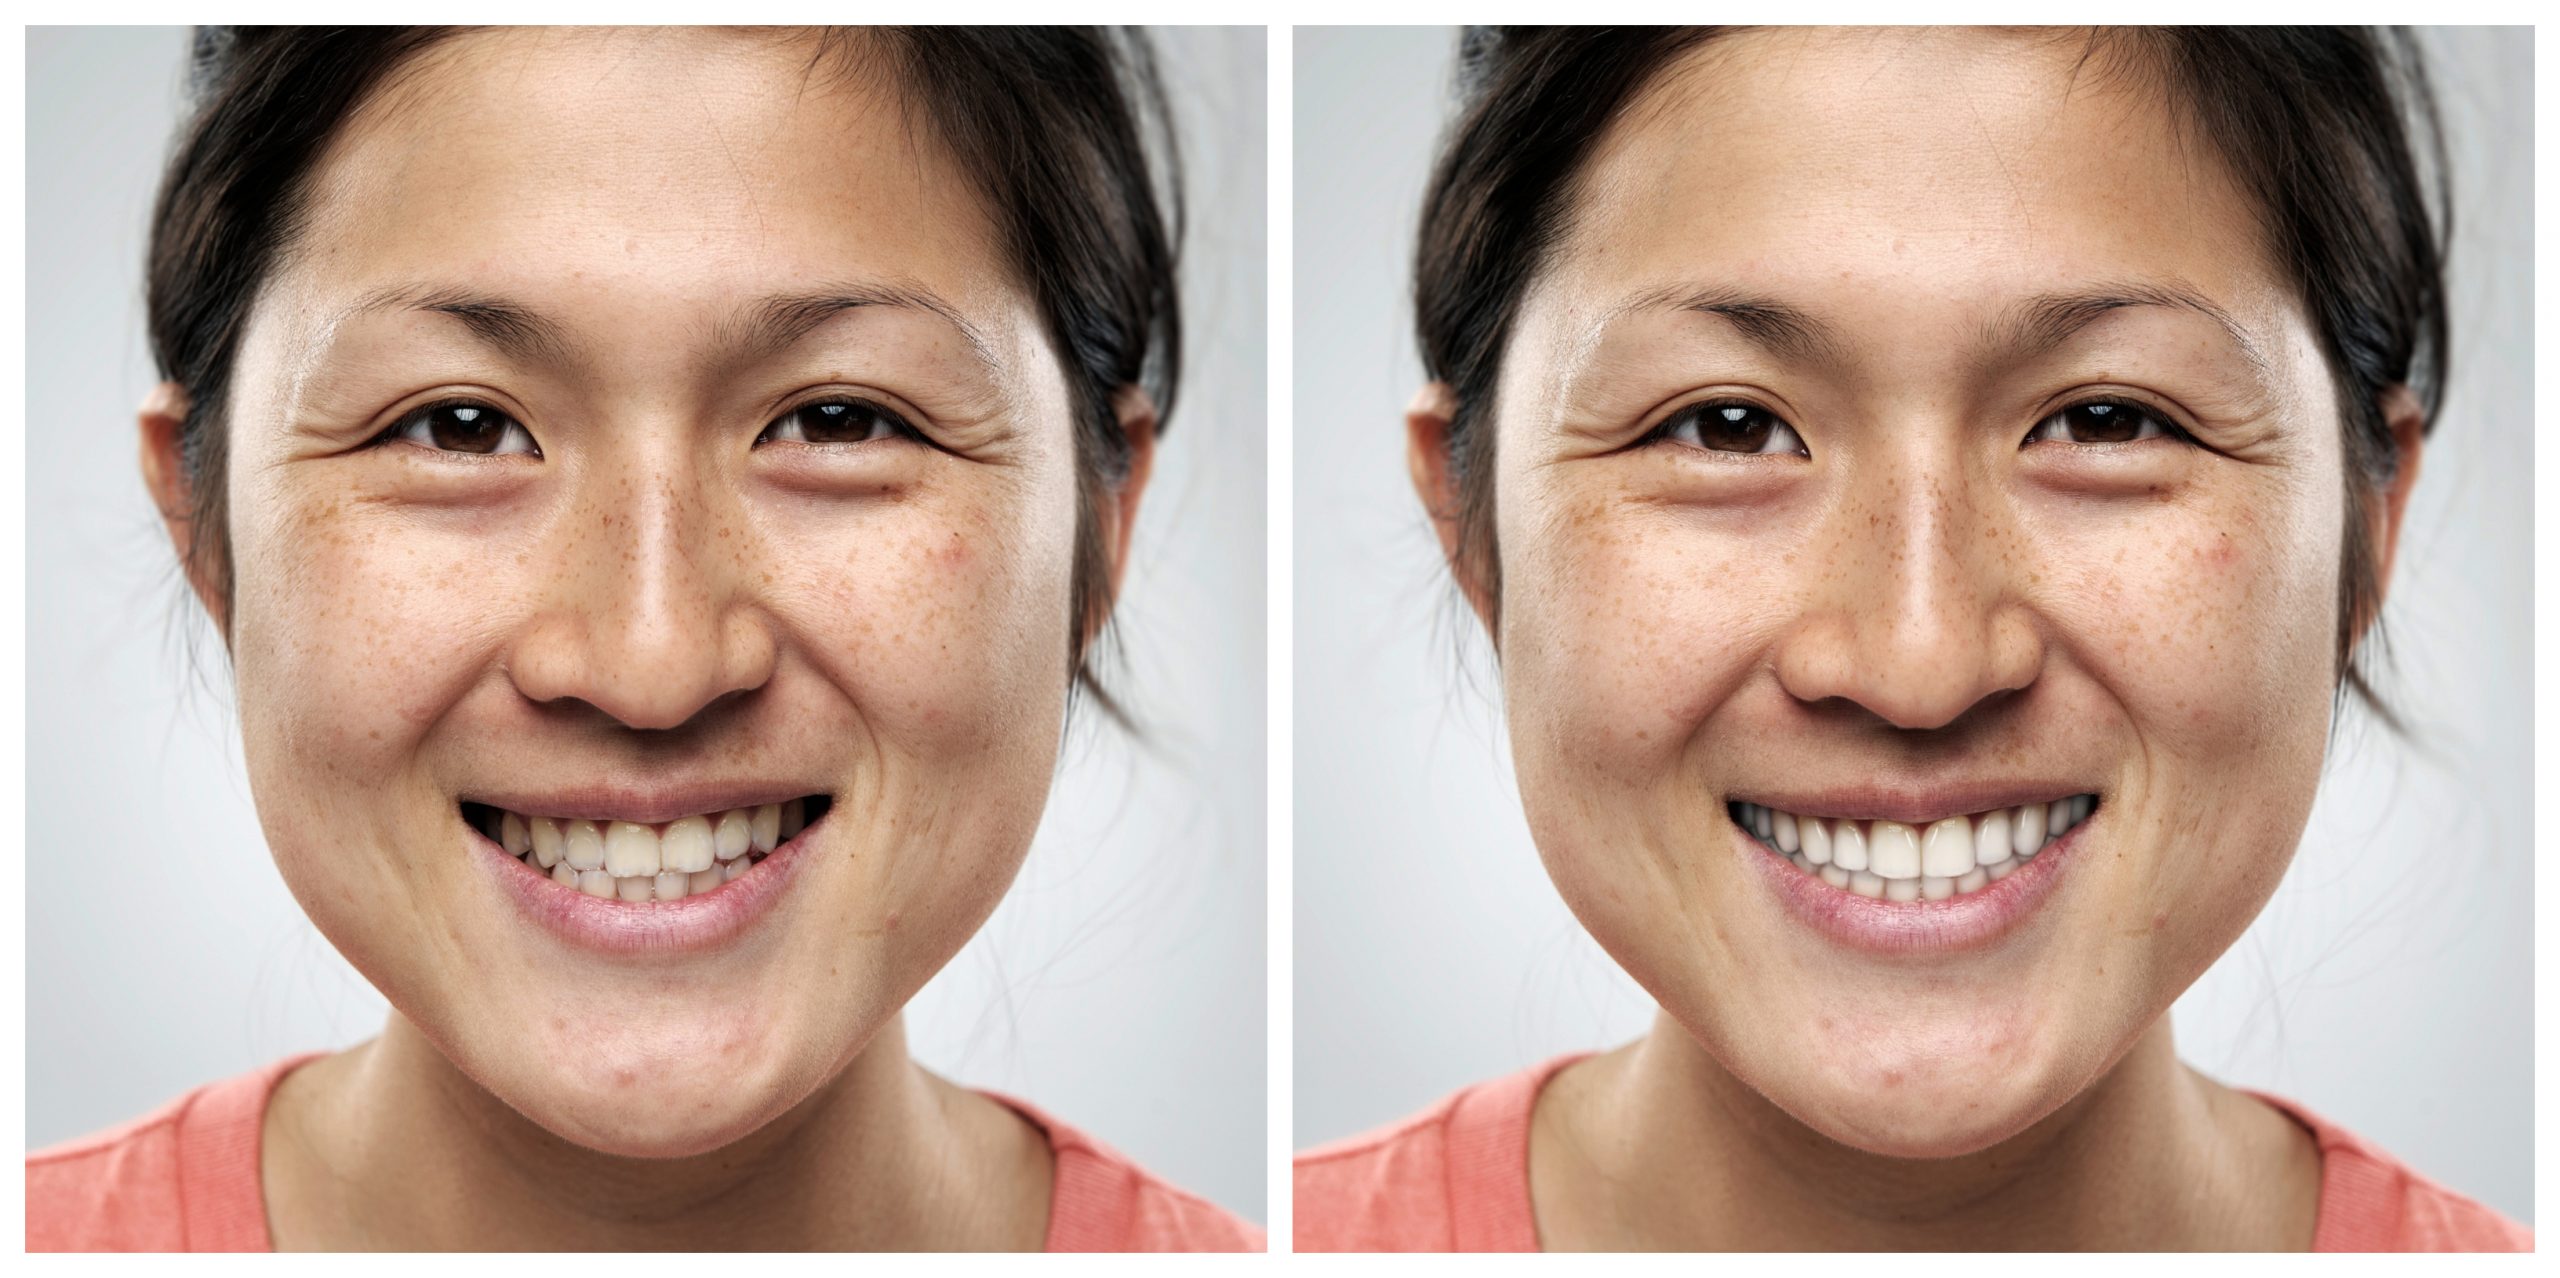 Smile Restoration - Before and After16